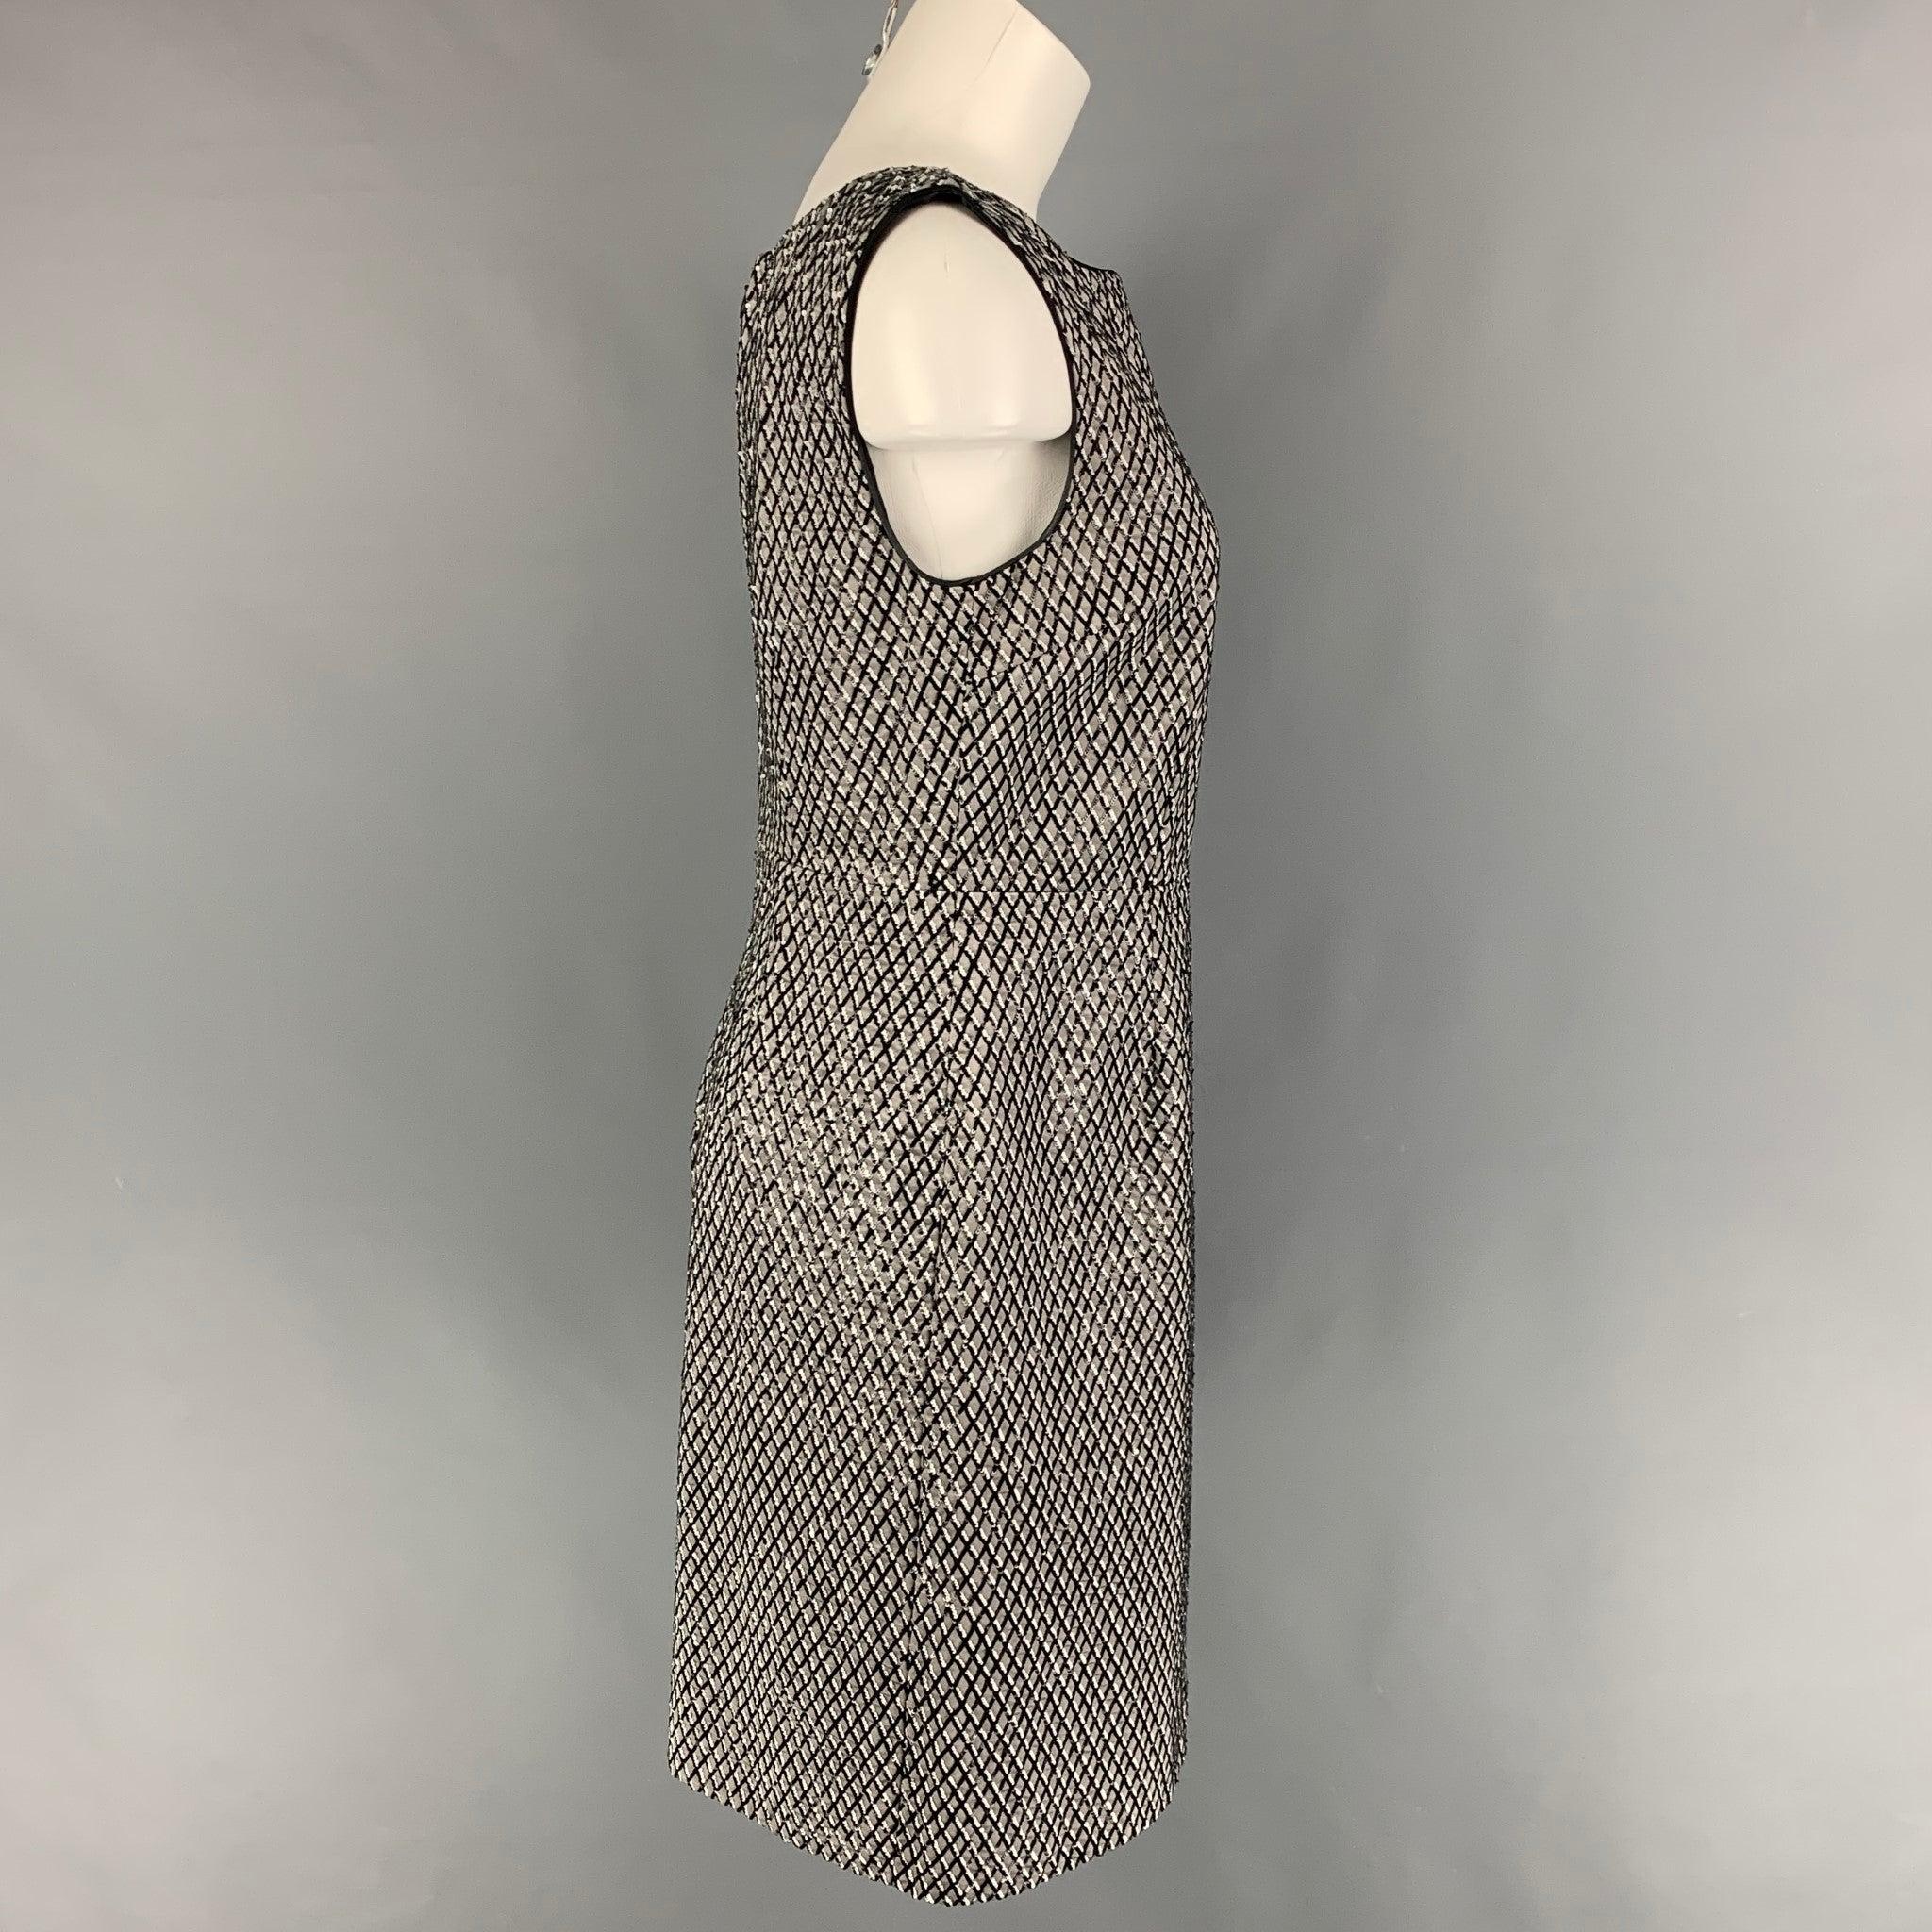 MARC JACOBS dress comes in a gray & black sequined silk featuring a shift style, sleeveless, and a back zip up closure. Made in USA.
Excellent
Pre-Owned Condition. 

Marked:   4 

Measurements: 
 
Shoulder: 15.5 inches  Bust: 34 inches  Waist: 30